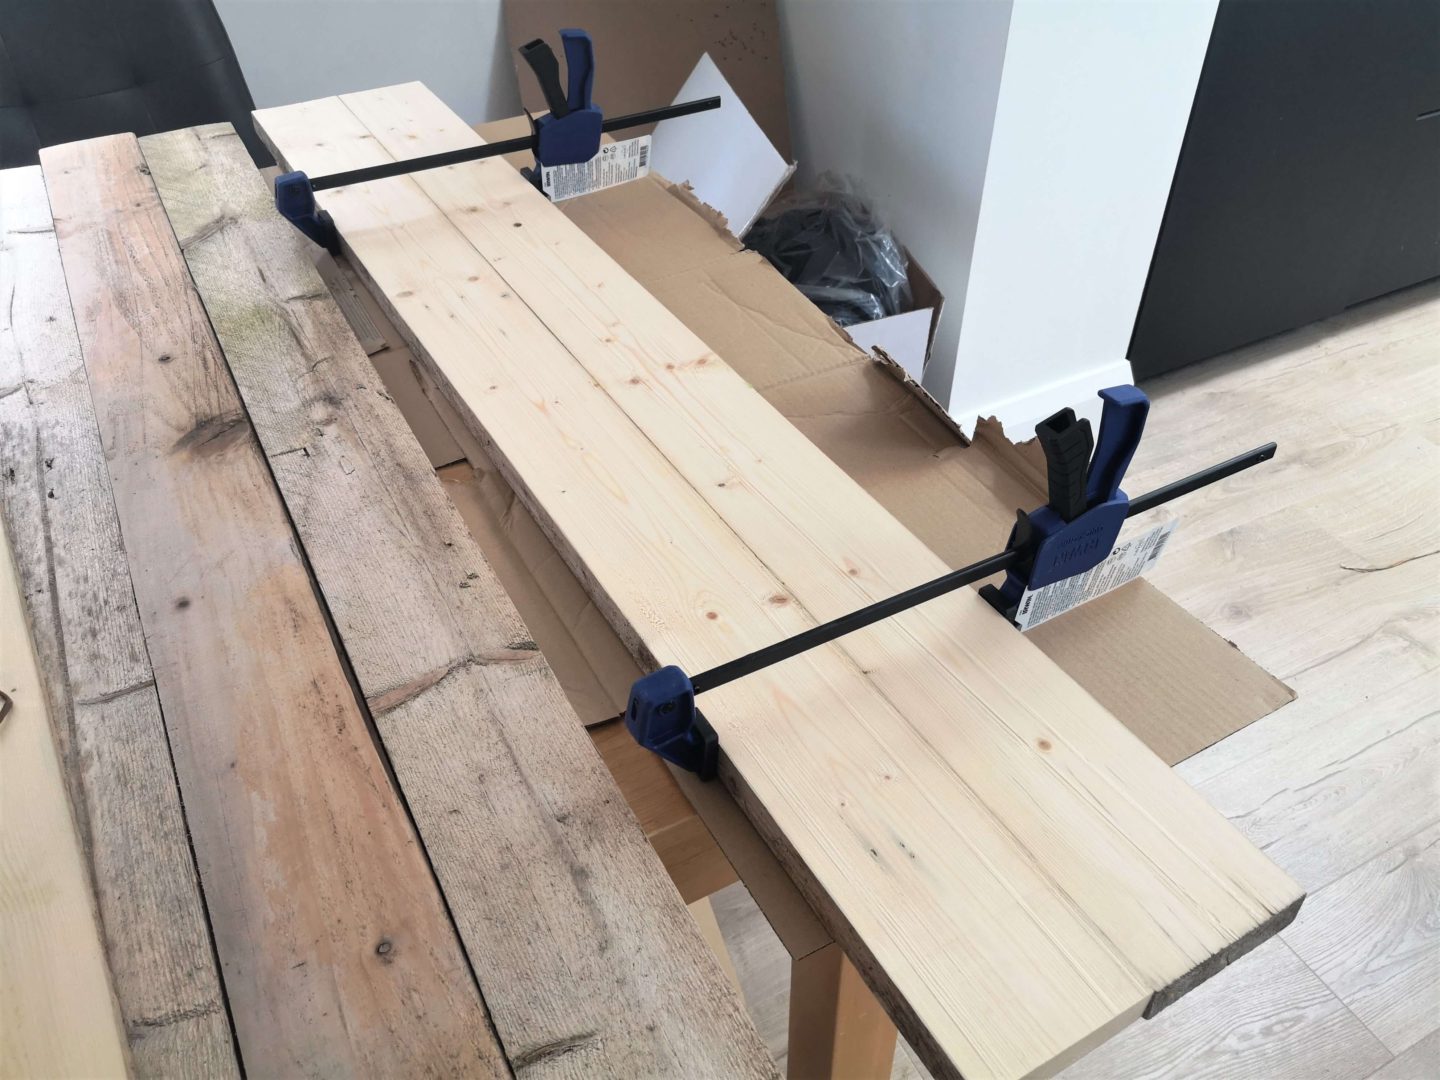 Two wooden boards glued together and clamped.